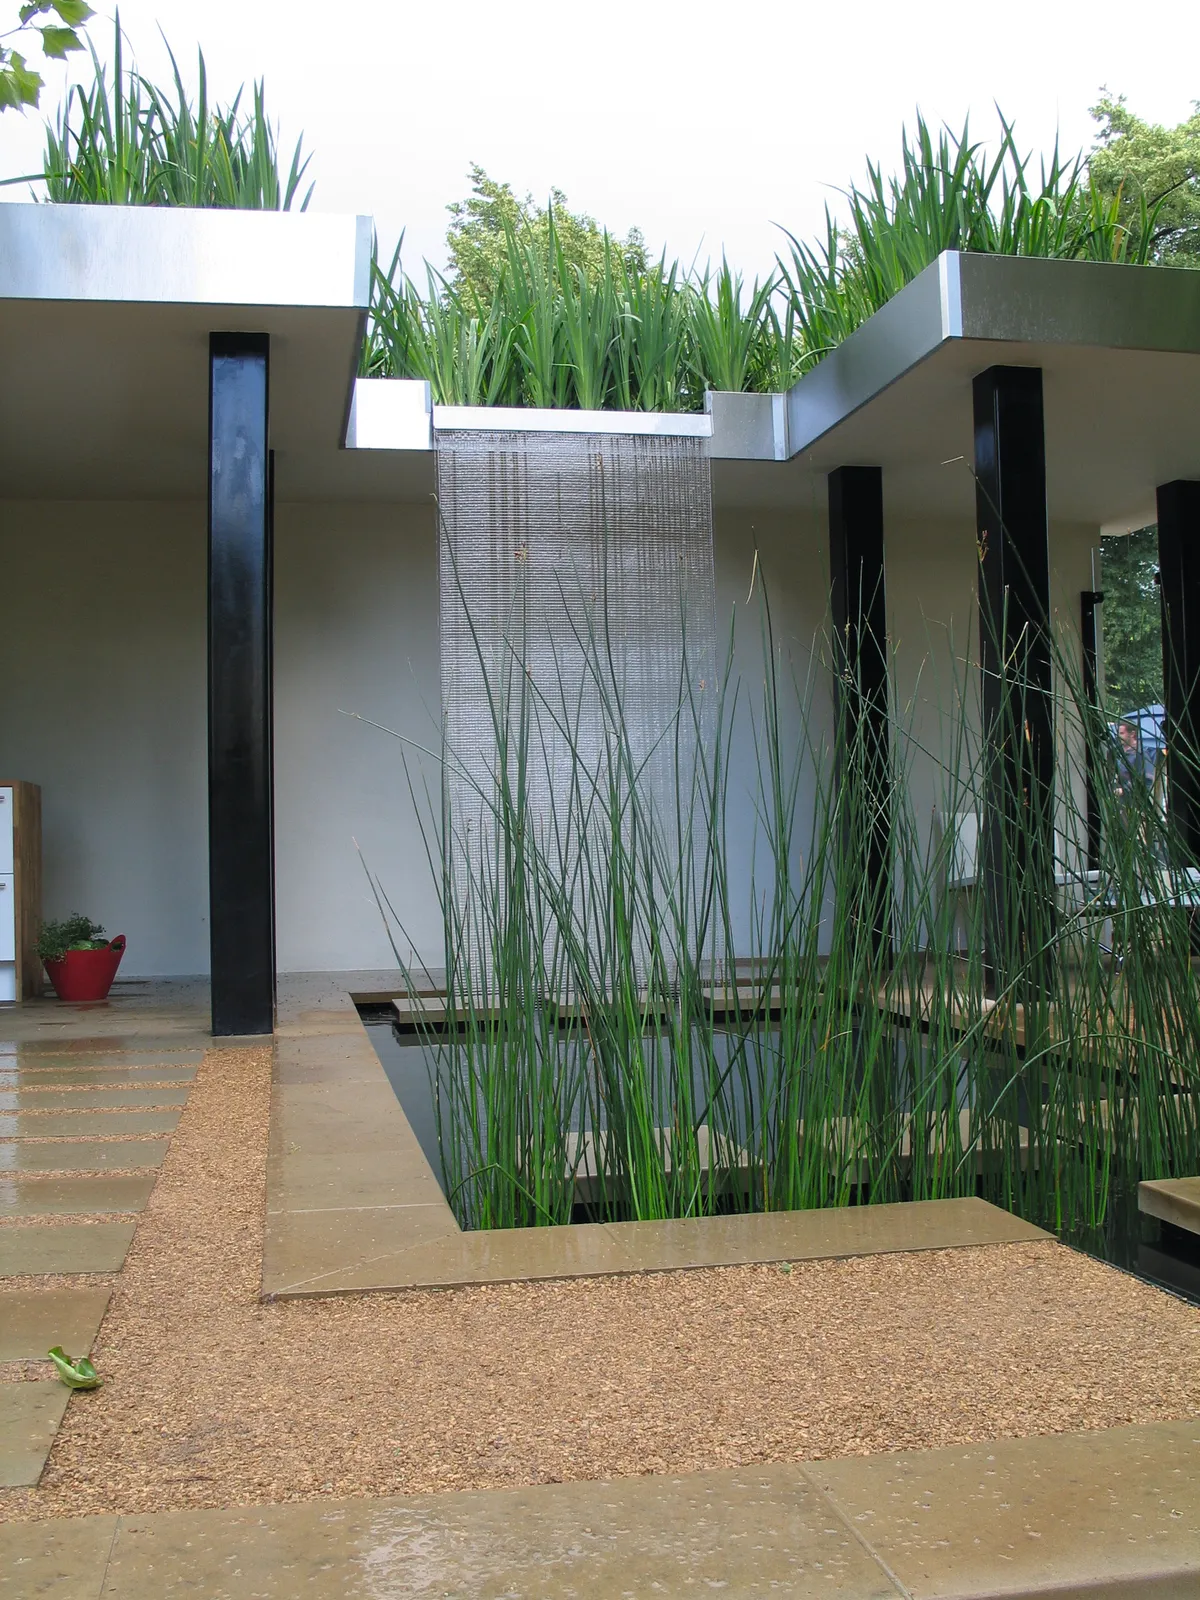 Damp-loving plants have been used to reduce water logging on this flat roof and contemporary design